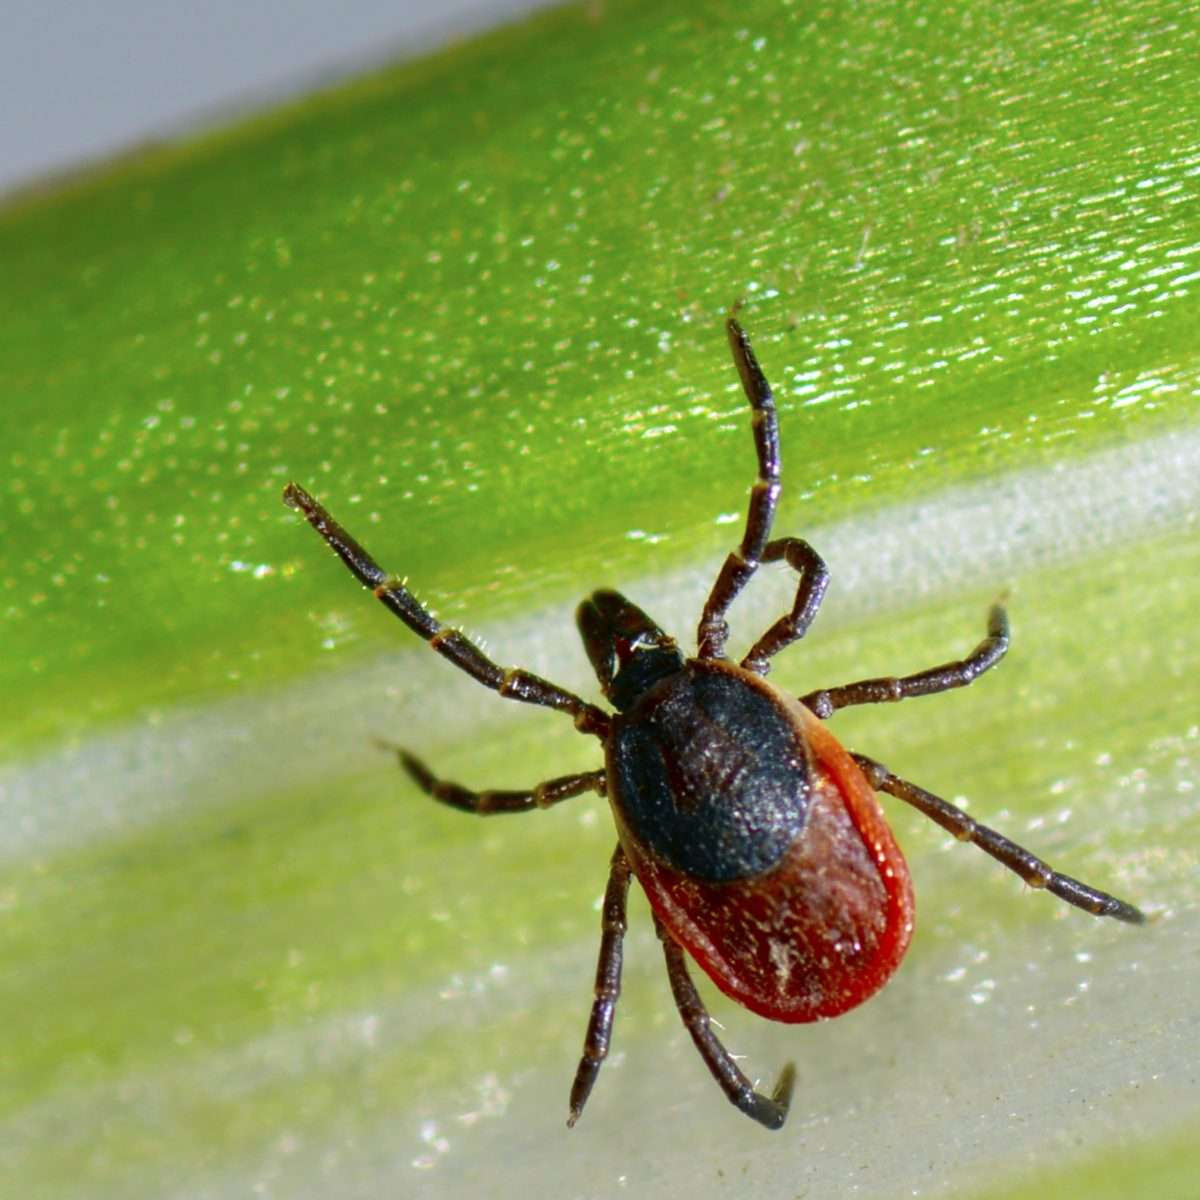 Lyme Disease in Dogs: Symptoms and Solutions